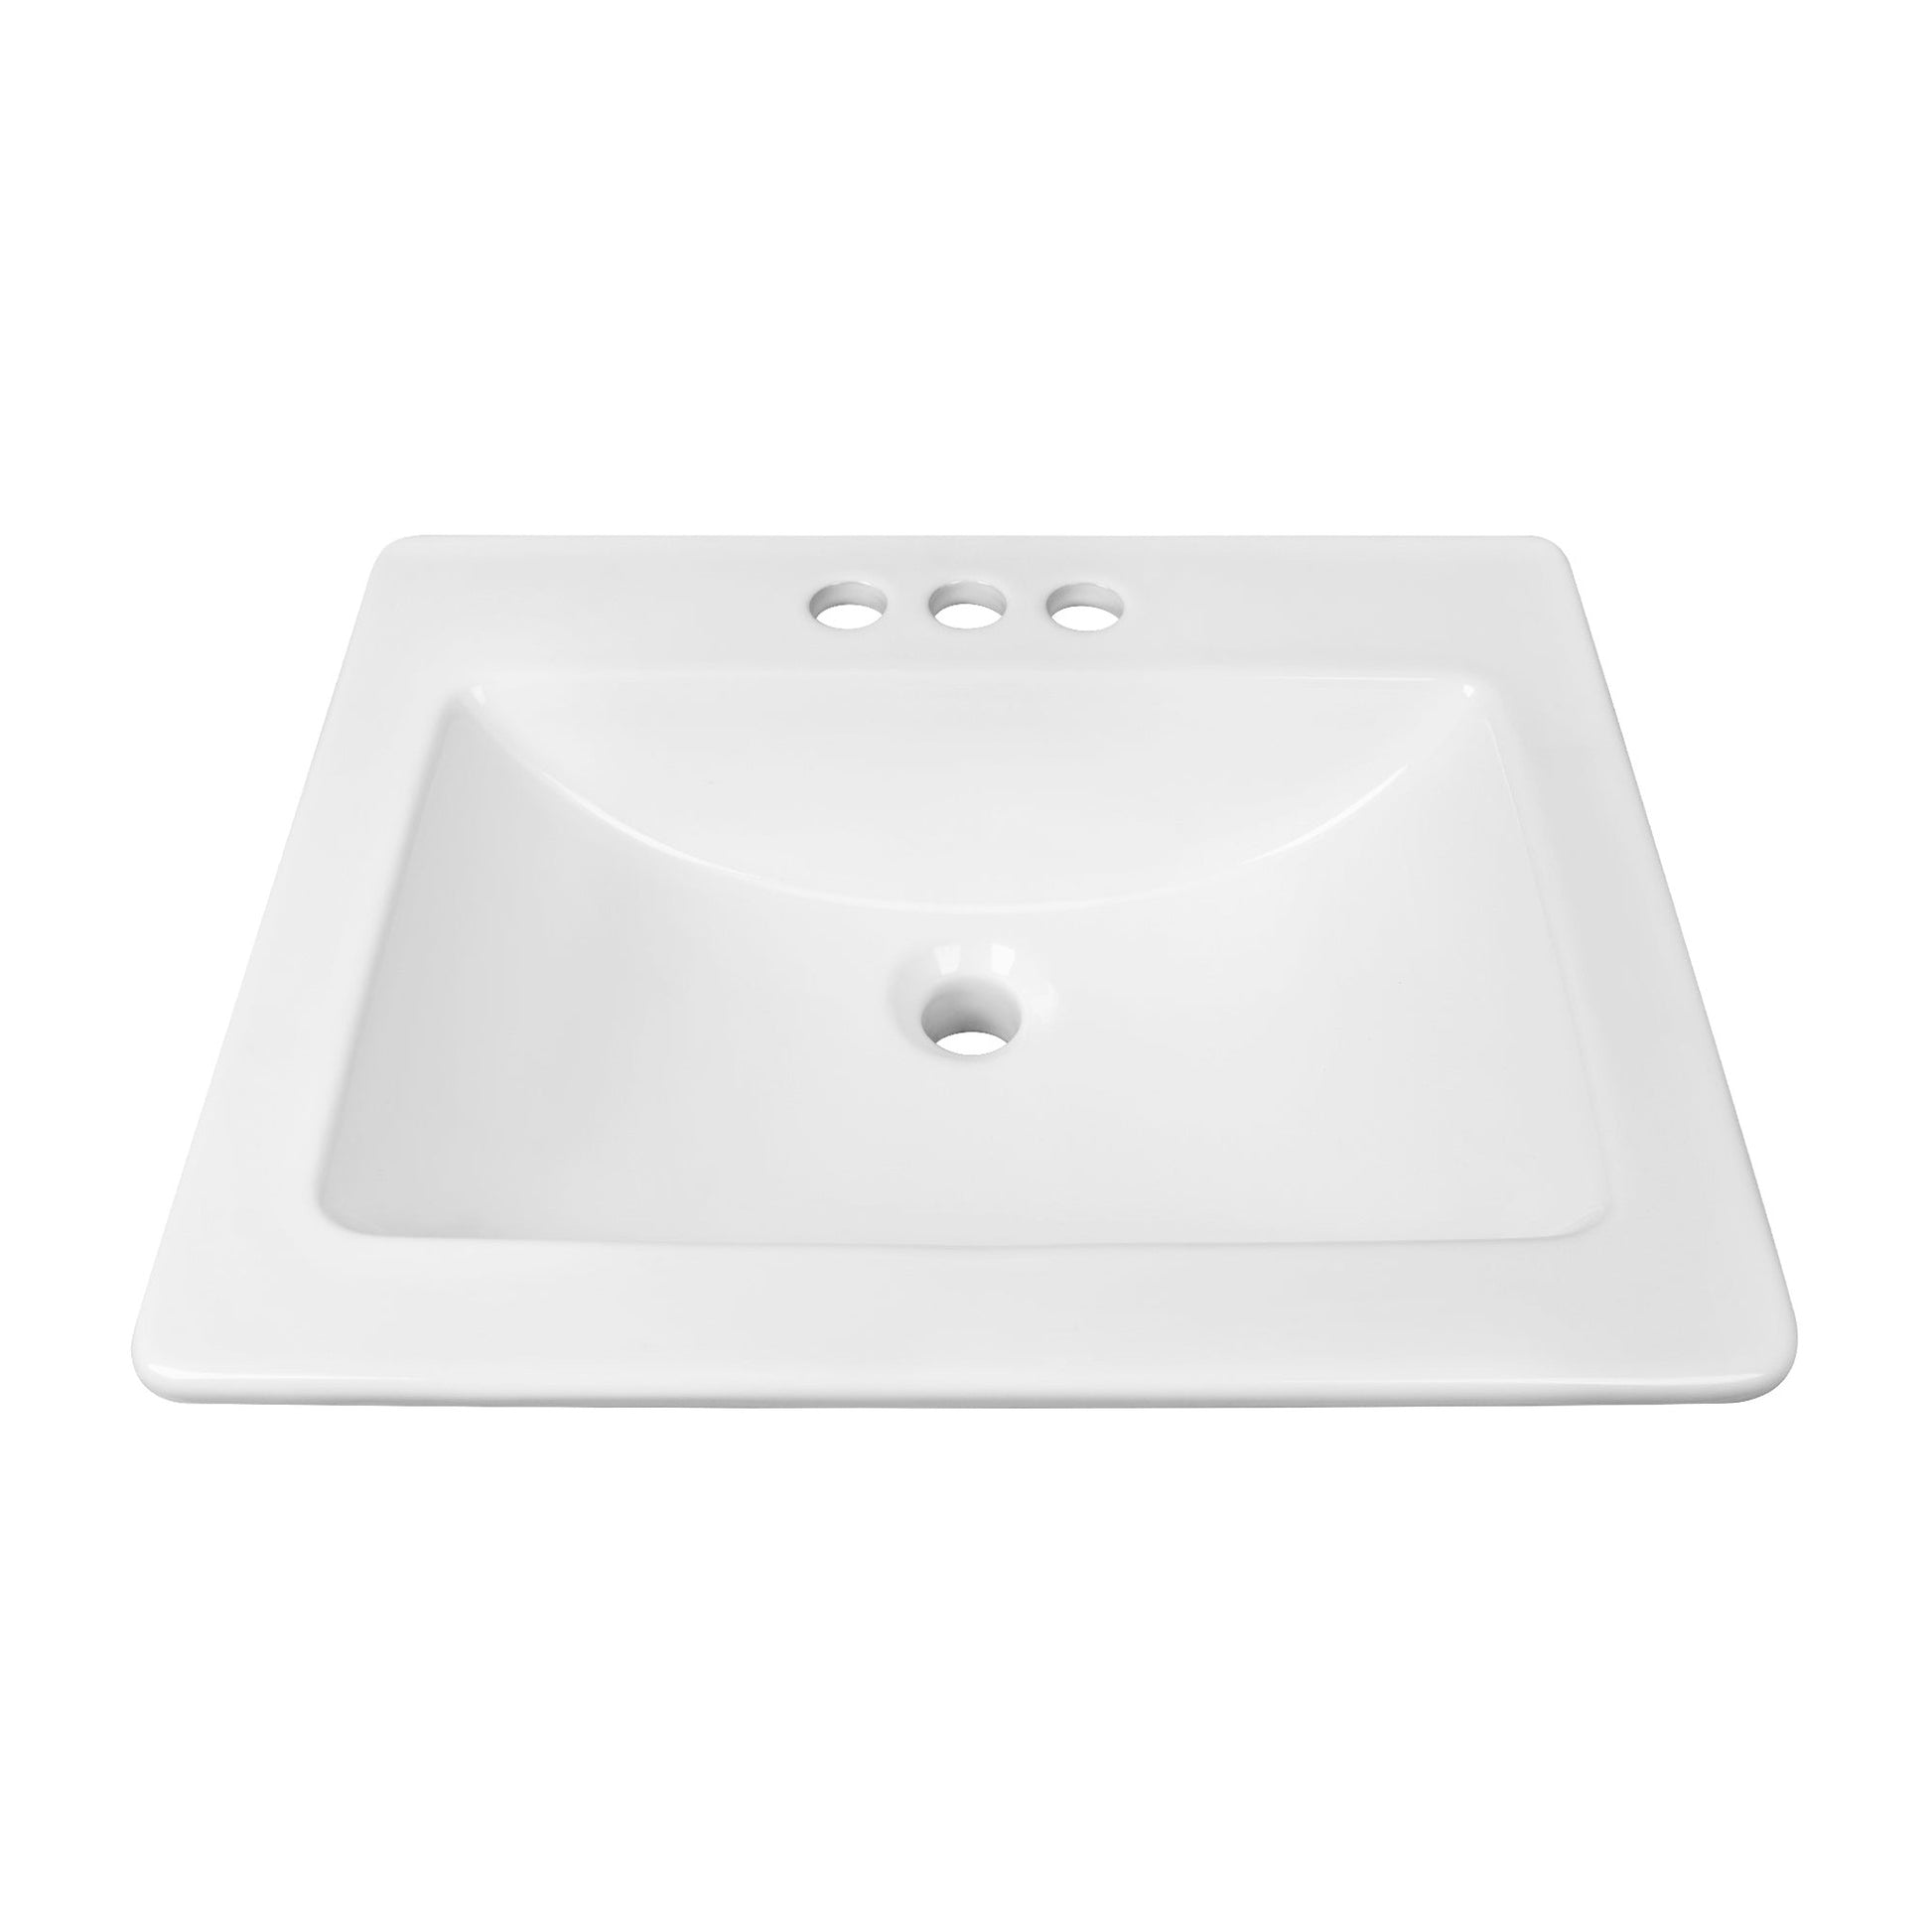 DeerValley DV-1DS0122 18" Rectangular White Drop-in Bathroom Sink With Overflow Hole